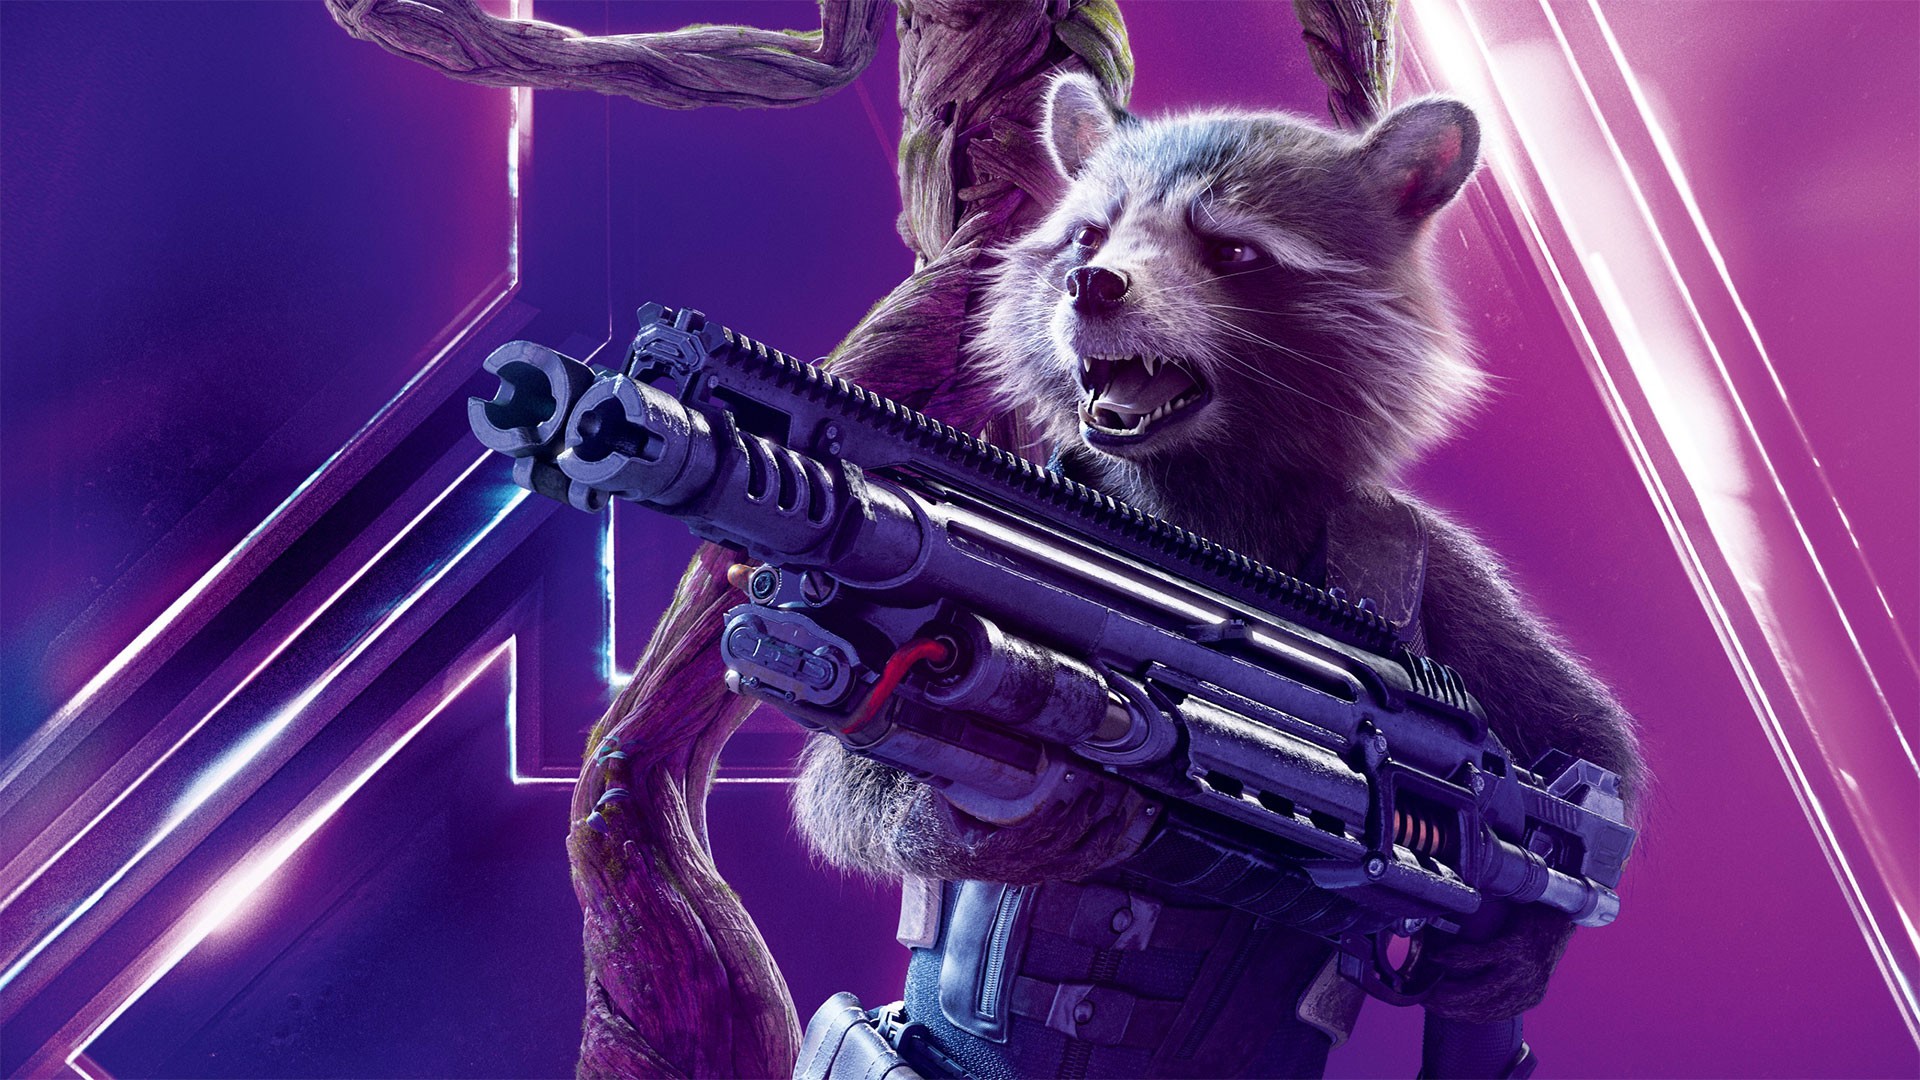 Rocket Raccoon Avengers Endgame Wallpaper HD with high-resolution 1920x1080 pixel. You can use this poster wallpaper for your Desktop Computers, Mac Screensavers, Windows Backgrounds, iPhone Wallpapers, Tablet or Android Lock screen and another Mobile device